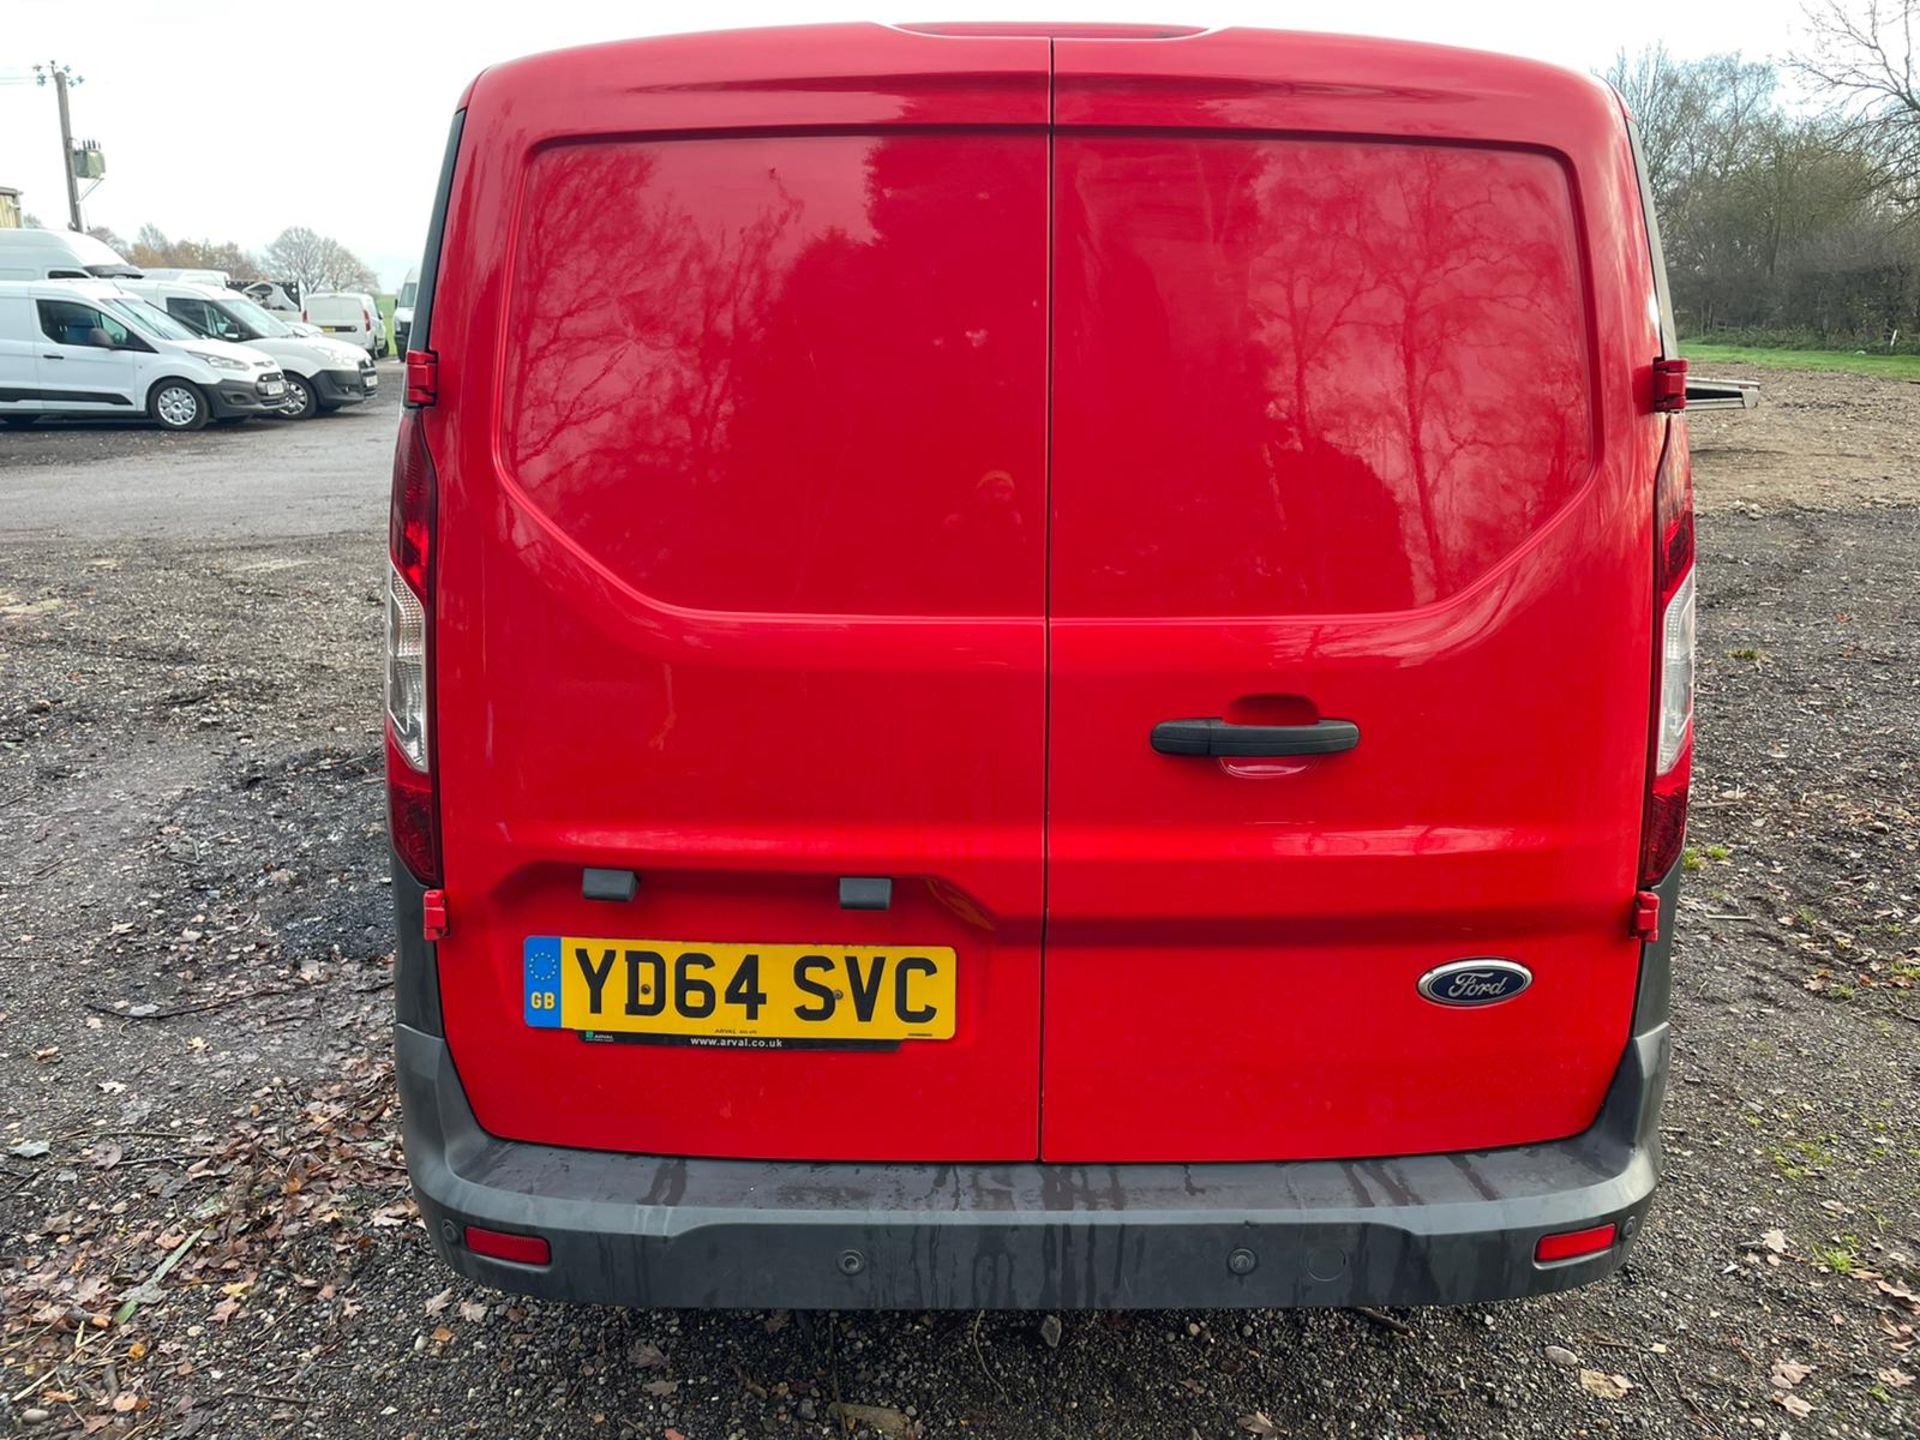 2014/64 REG FORD TRANSIT CONNECT 210 ECONETIC 1.6 DIESEL RED PANEL VAN, SHOWING 0 FORMER KEEPERS - Image 6 of 14